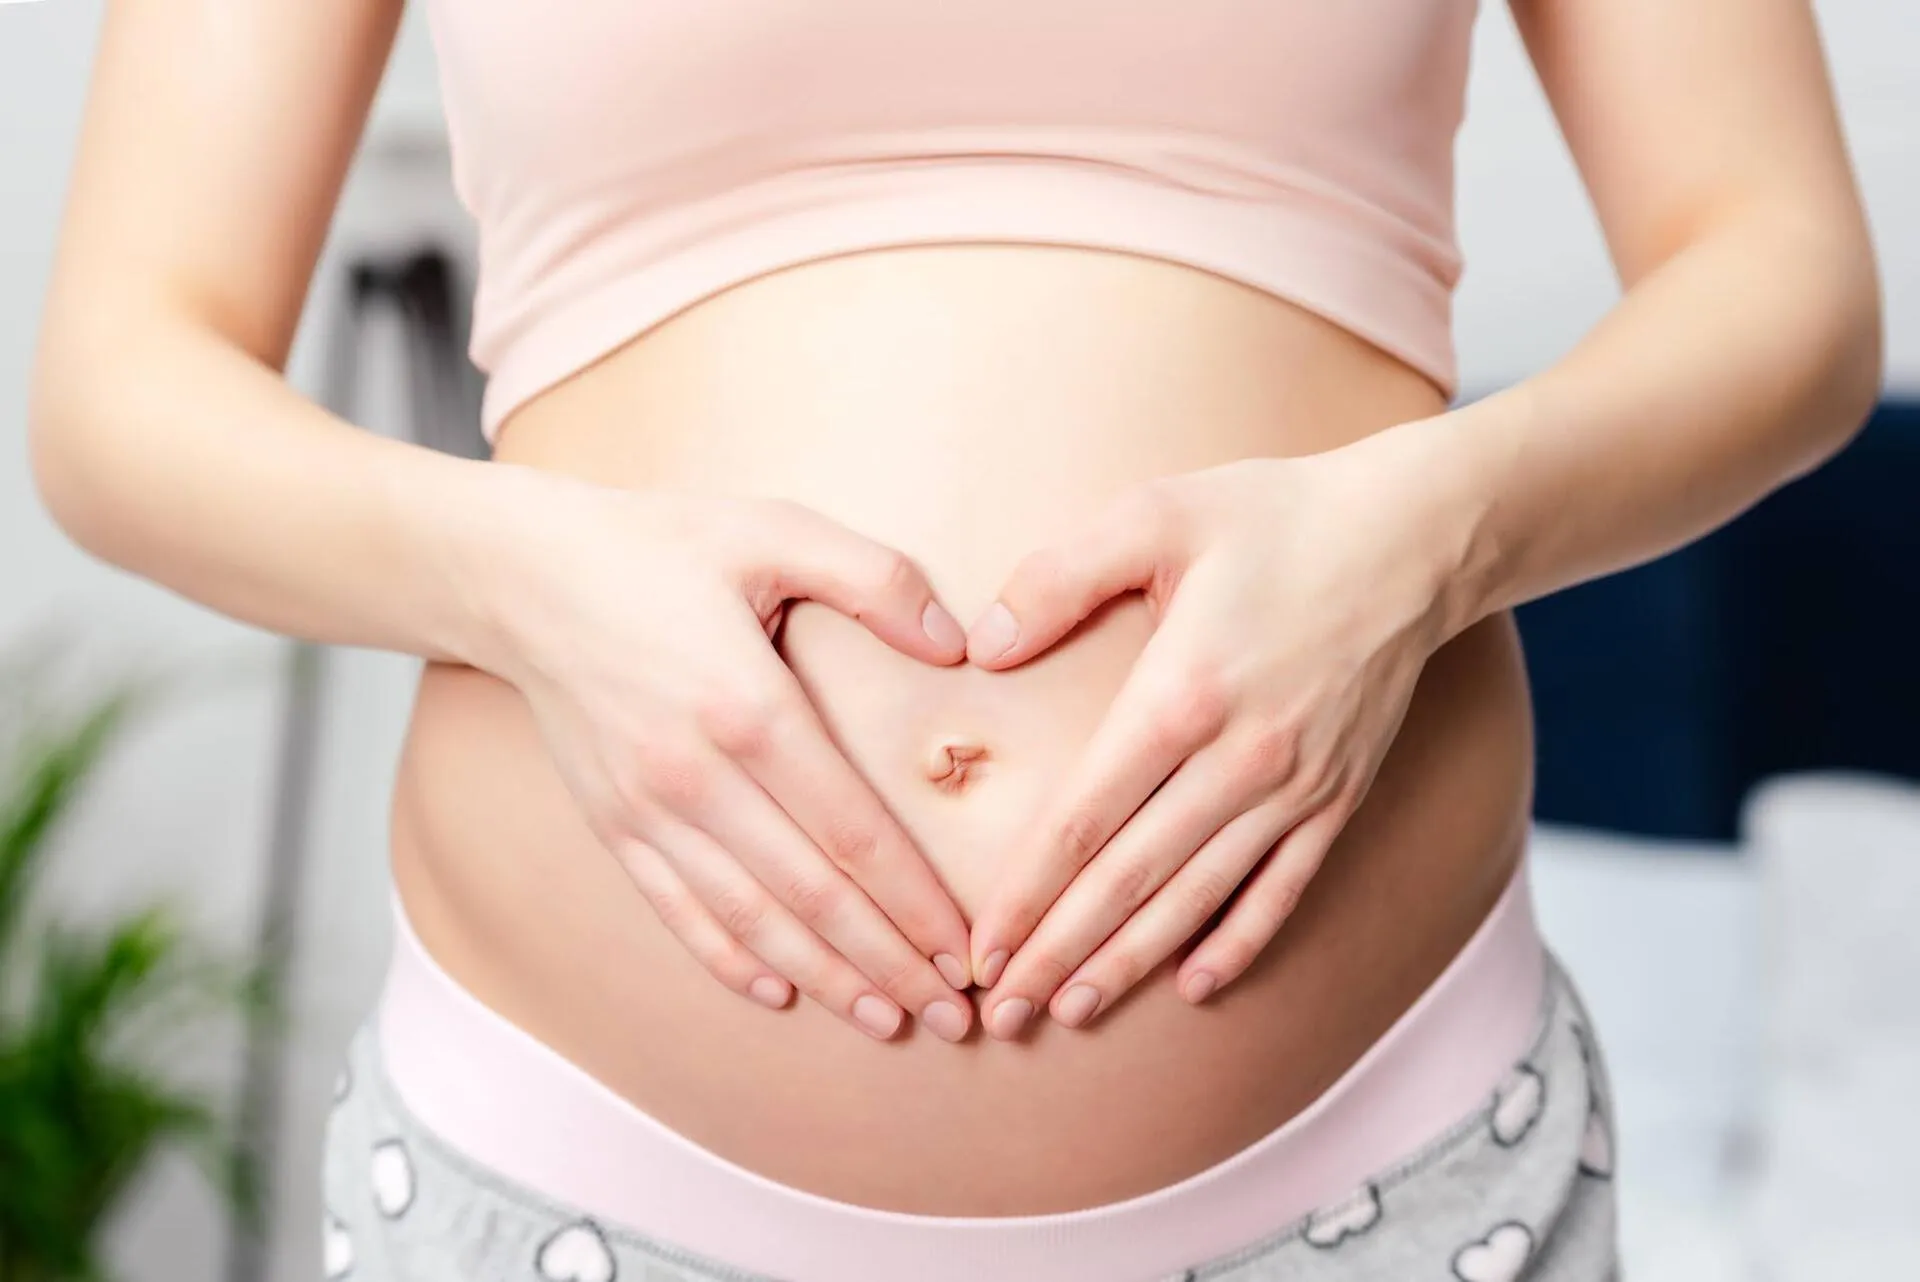 Why You Should See a Chiropractor During Your Pregnancy